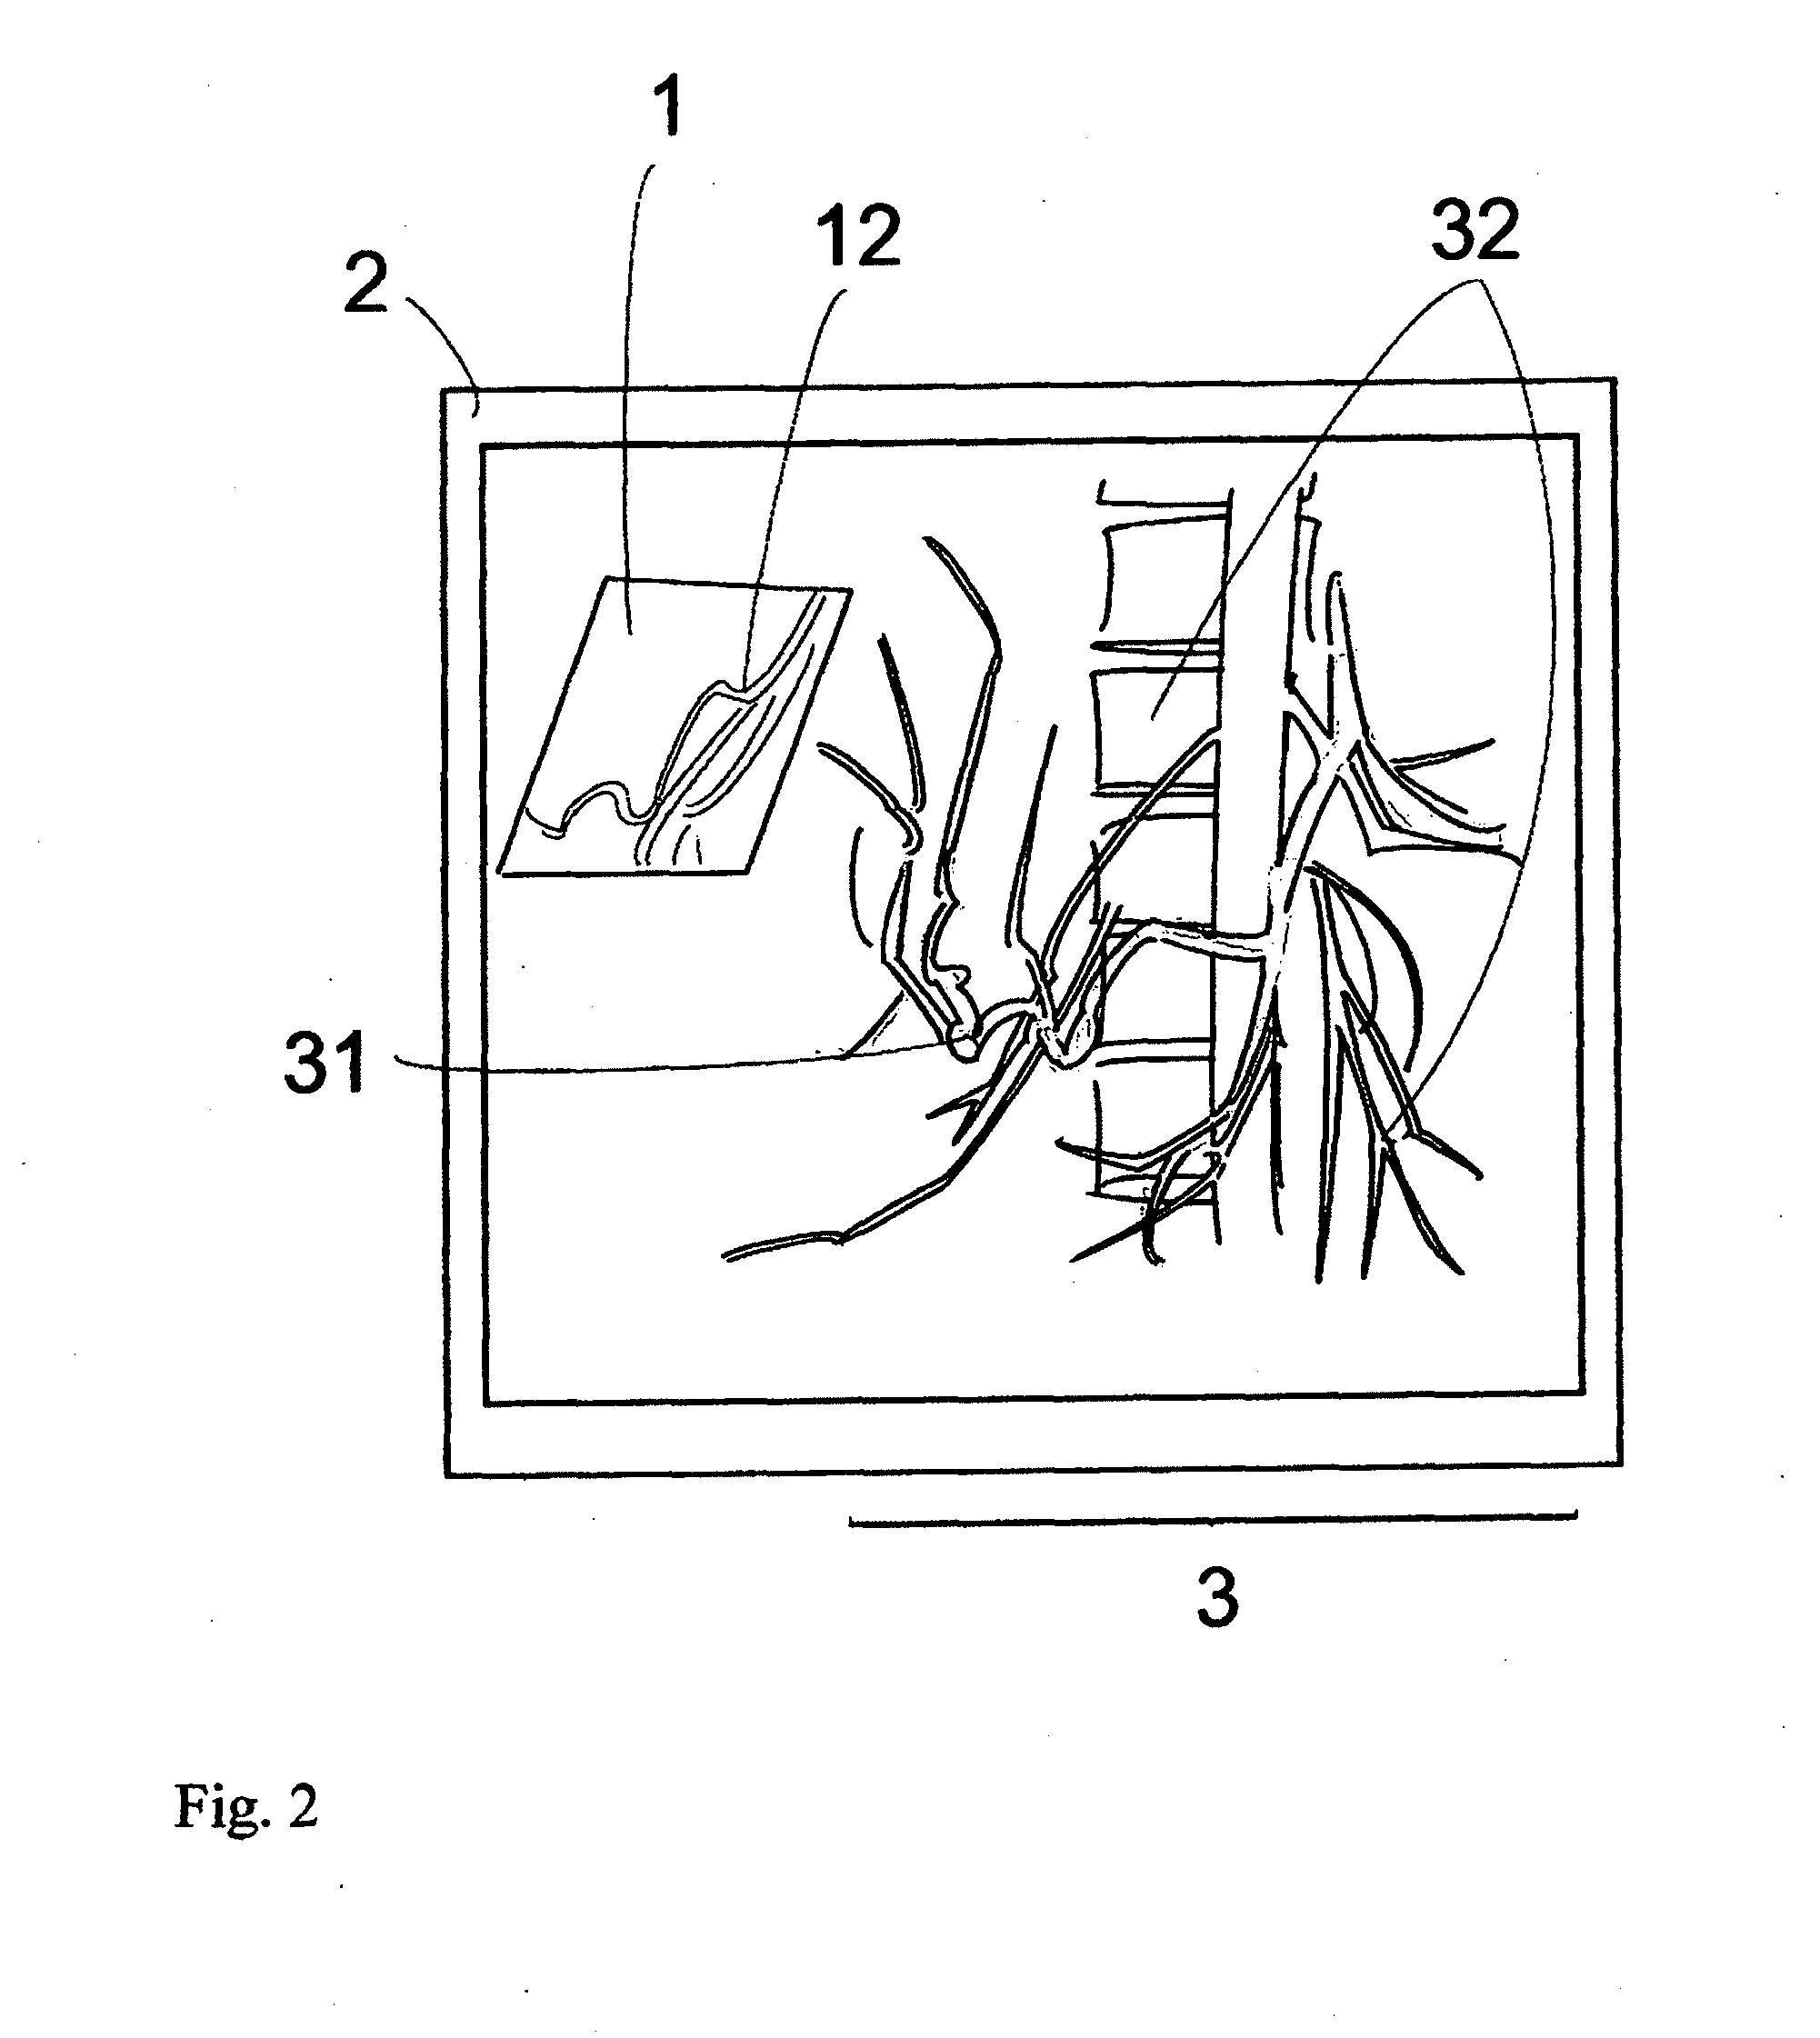 Virtual Penetrating Mirror Device for Visualizing Virtual Objects in Angiographic Applications